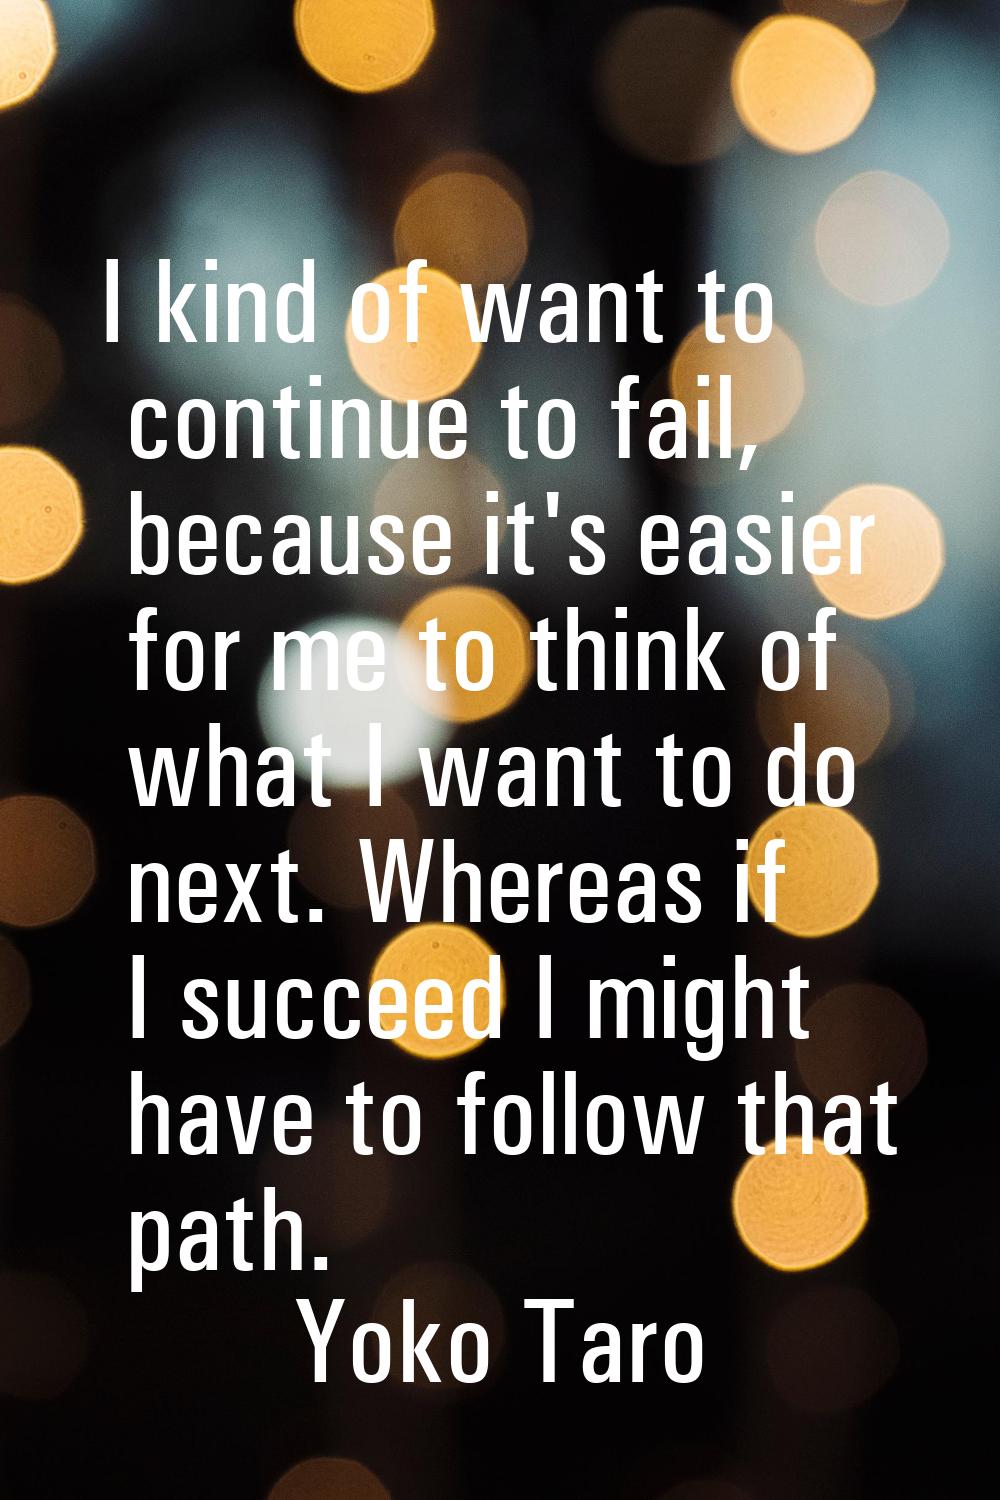 I kind of want to continue to fail, because it's easier for me to think of what I want to do next. 